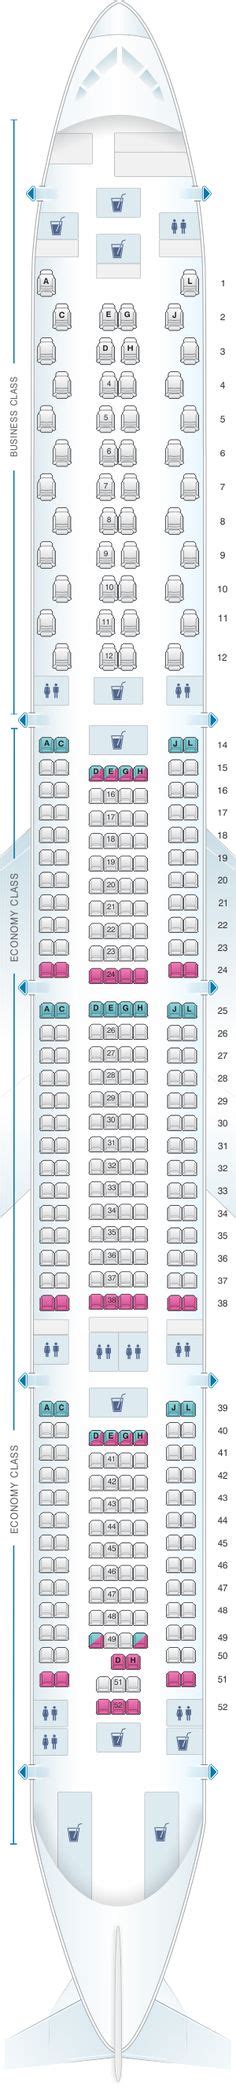 Seat Map Vietnam Airlines Airbus A350 900 China Eastern Airlines Air